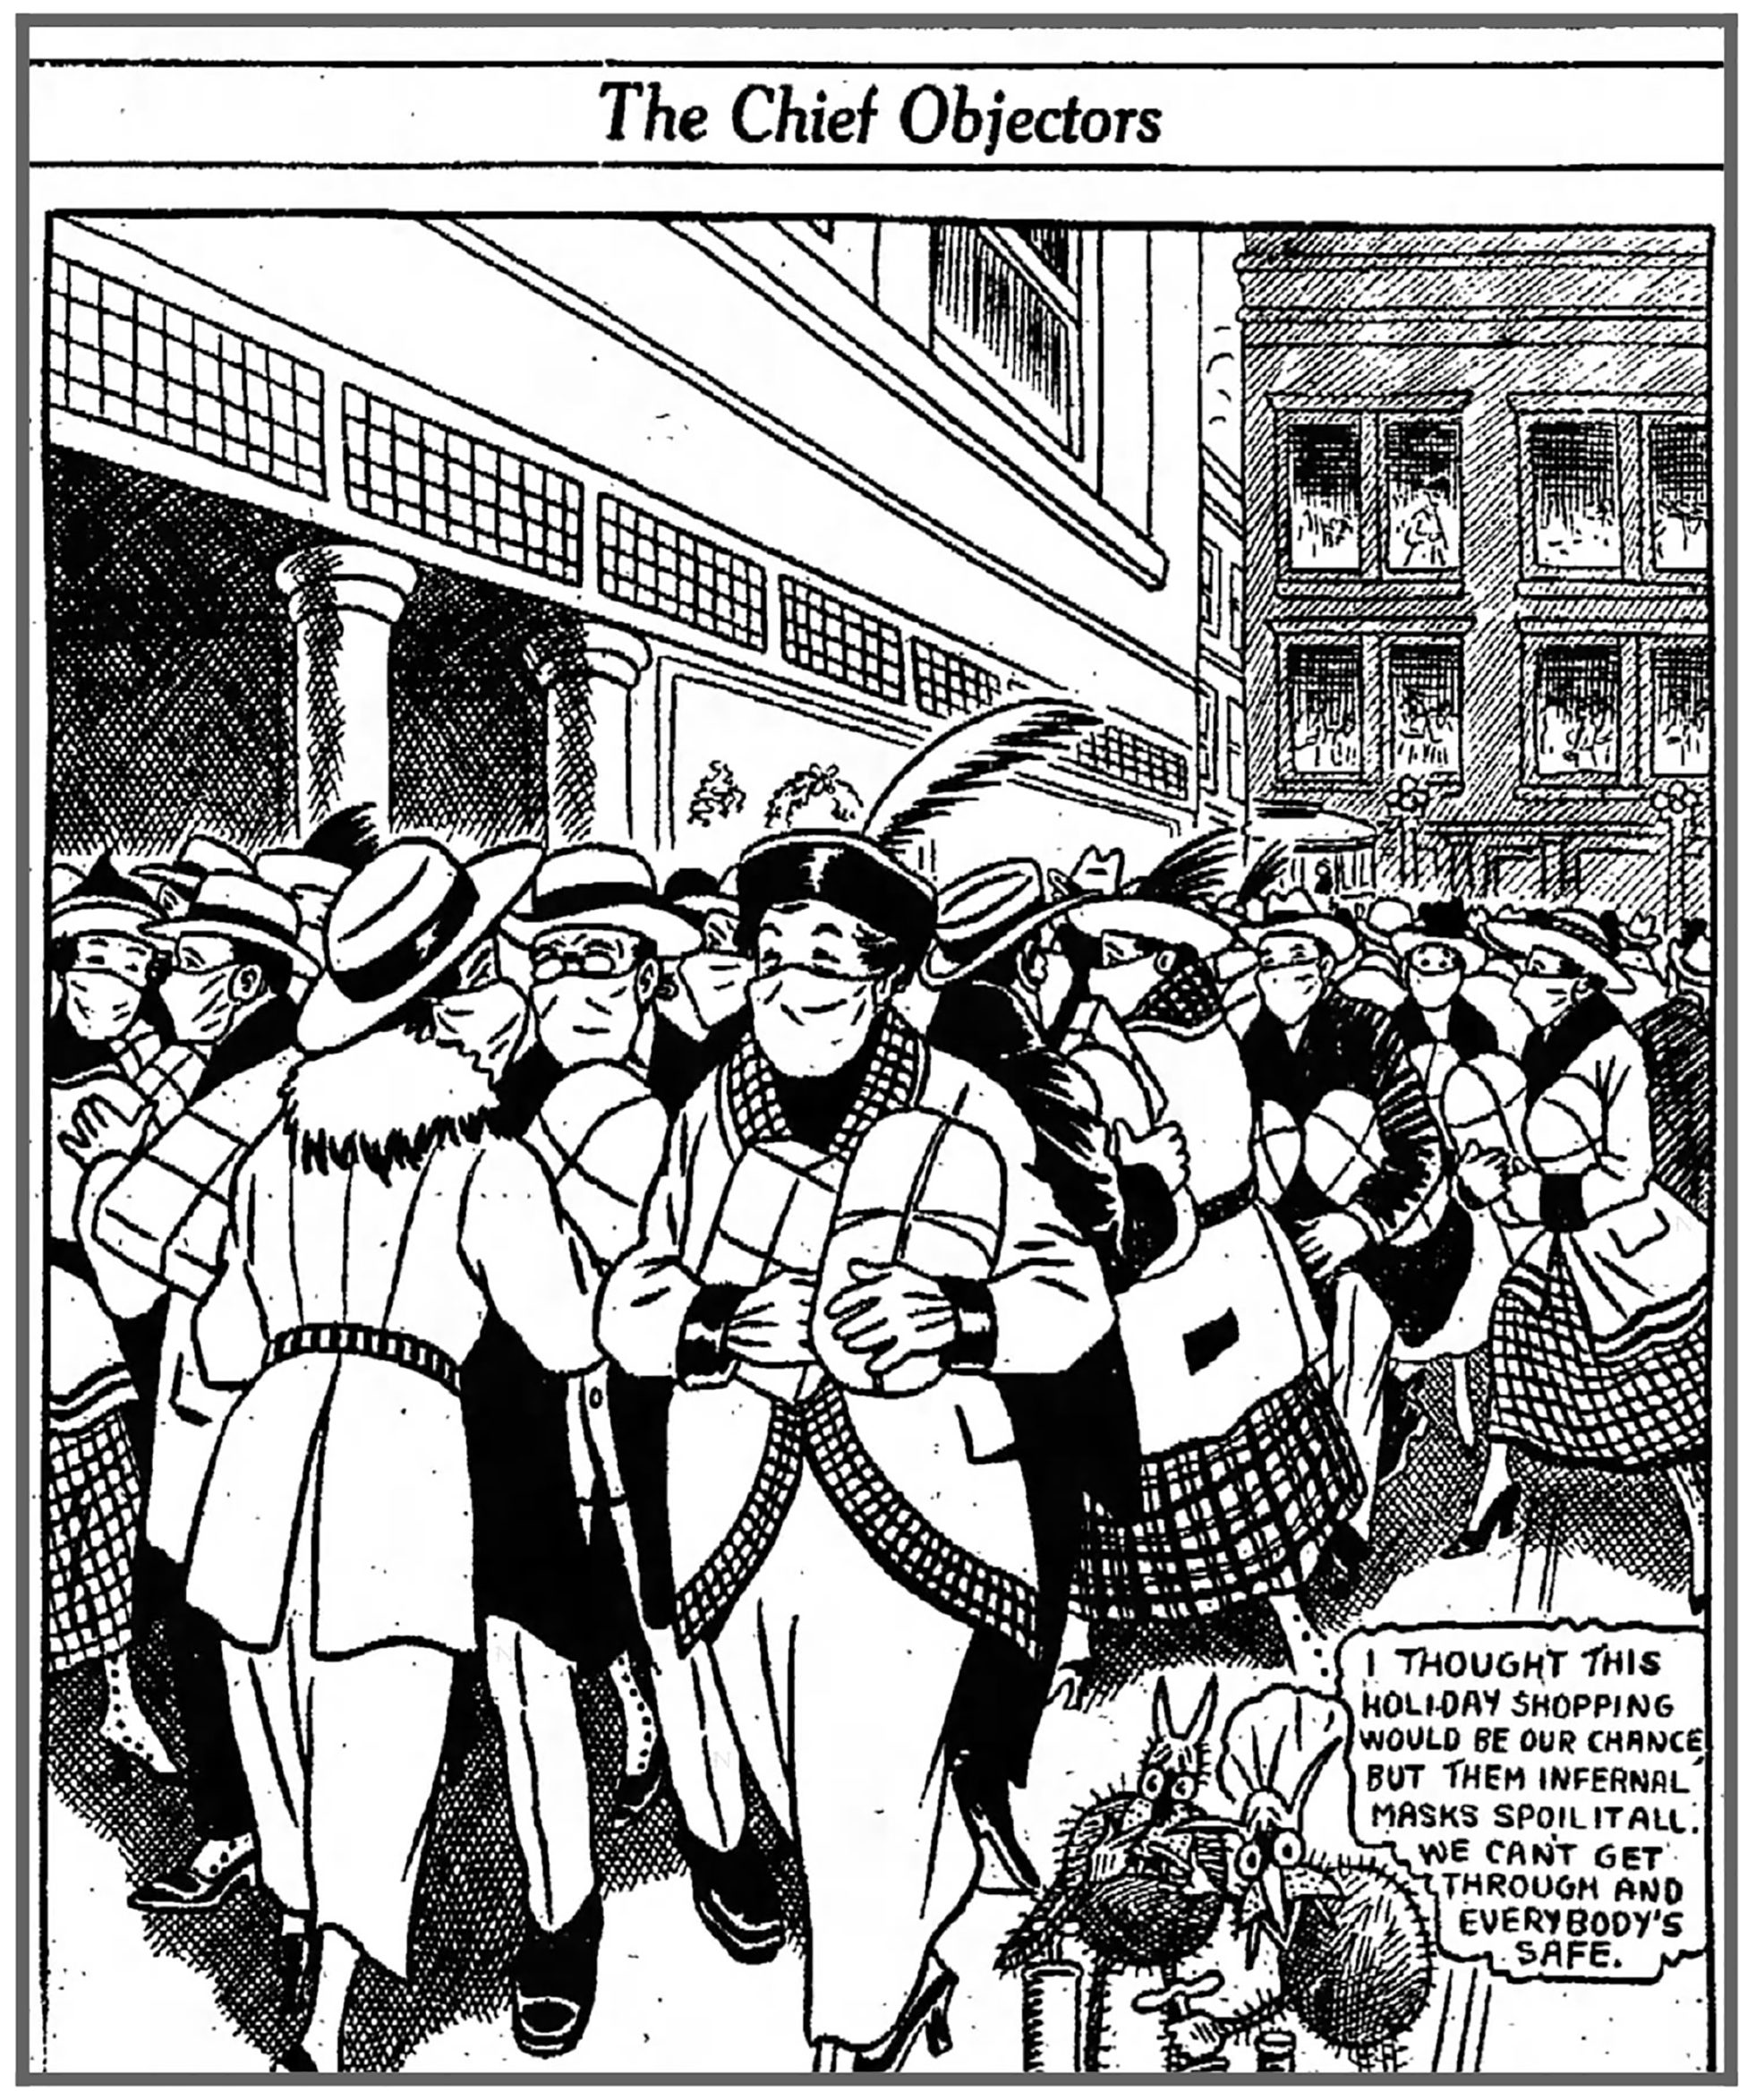 A cartoon from the Dec. 6 1918 issue of The Fort Wayne Sentinel